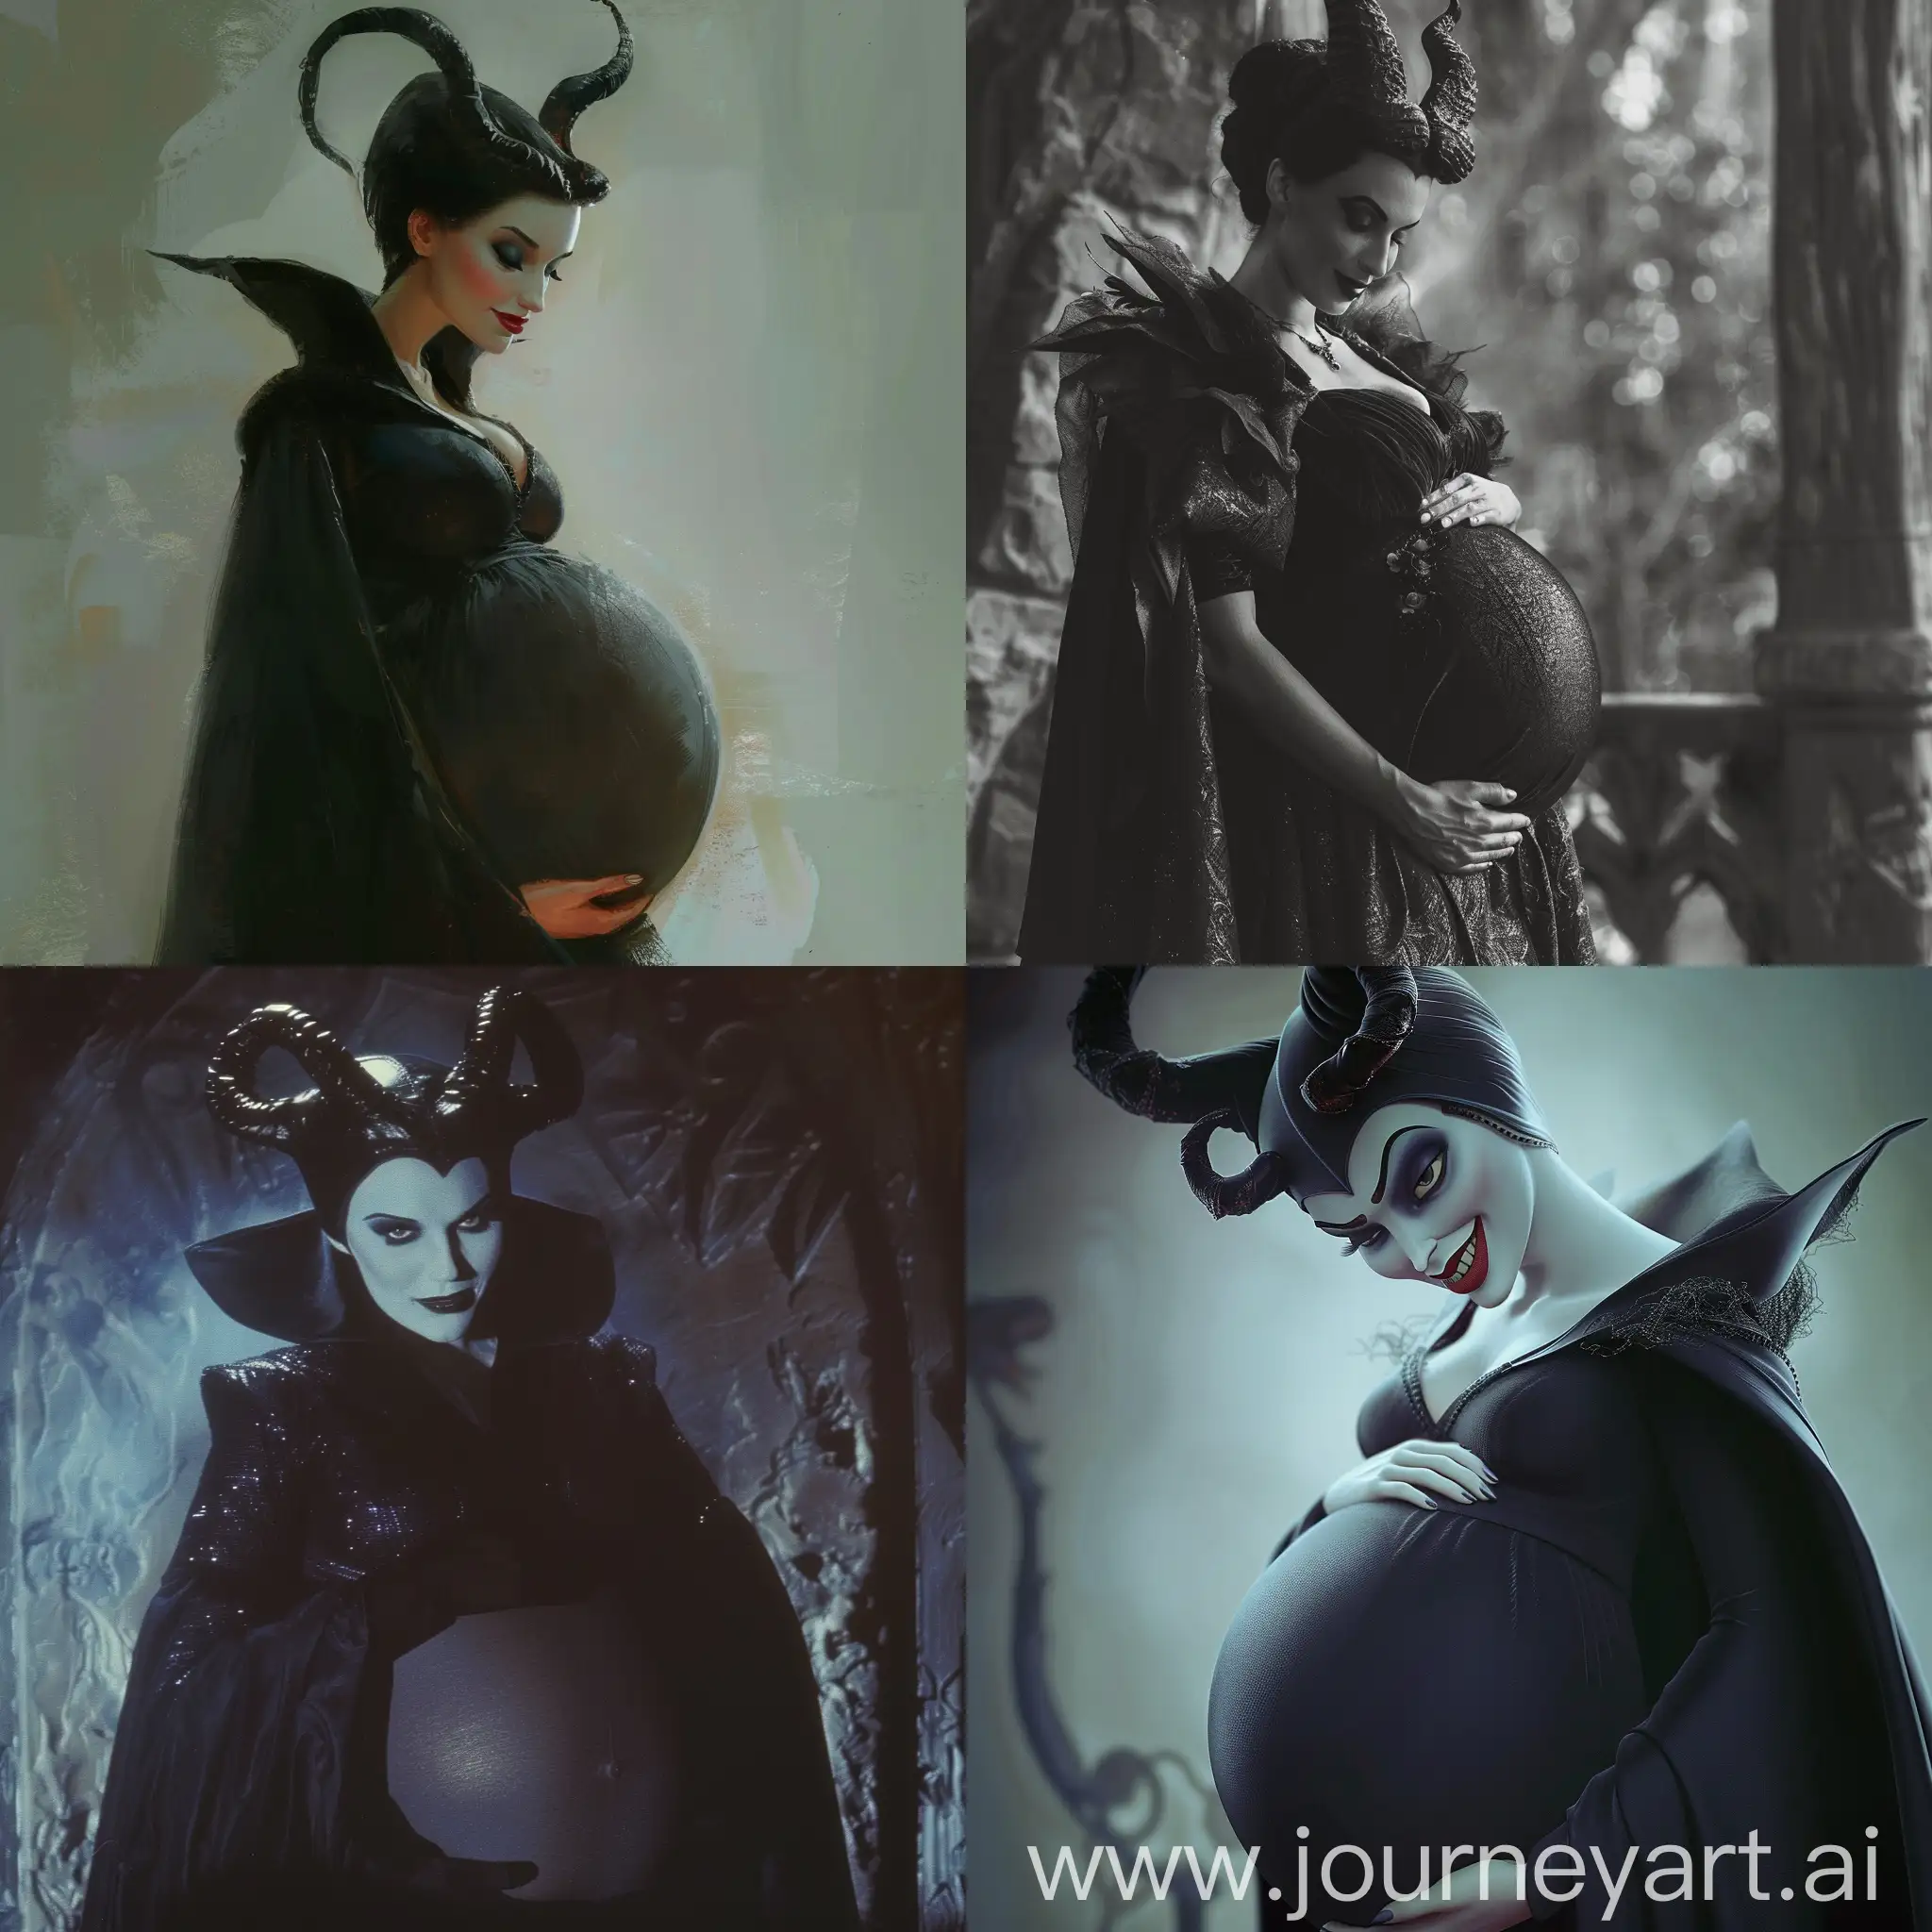 Maleficent-Very-Pregnant-Mysterious-Maternity-Portrait-with-Enigmatic-Gaze